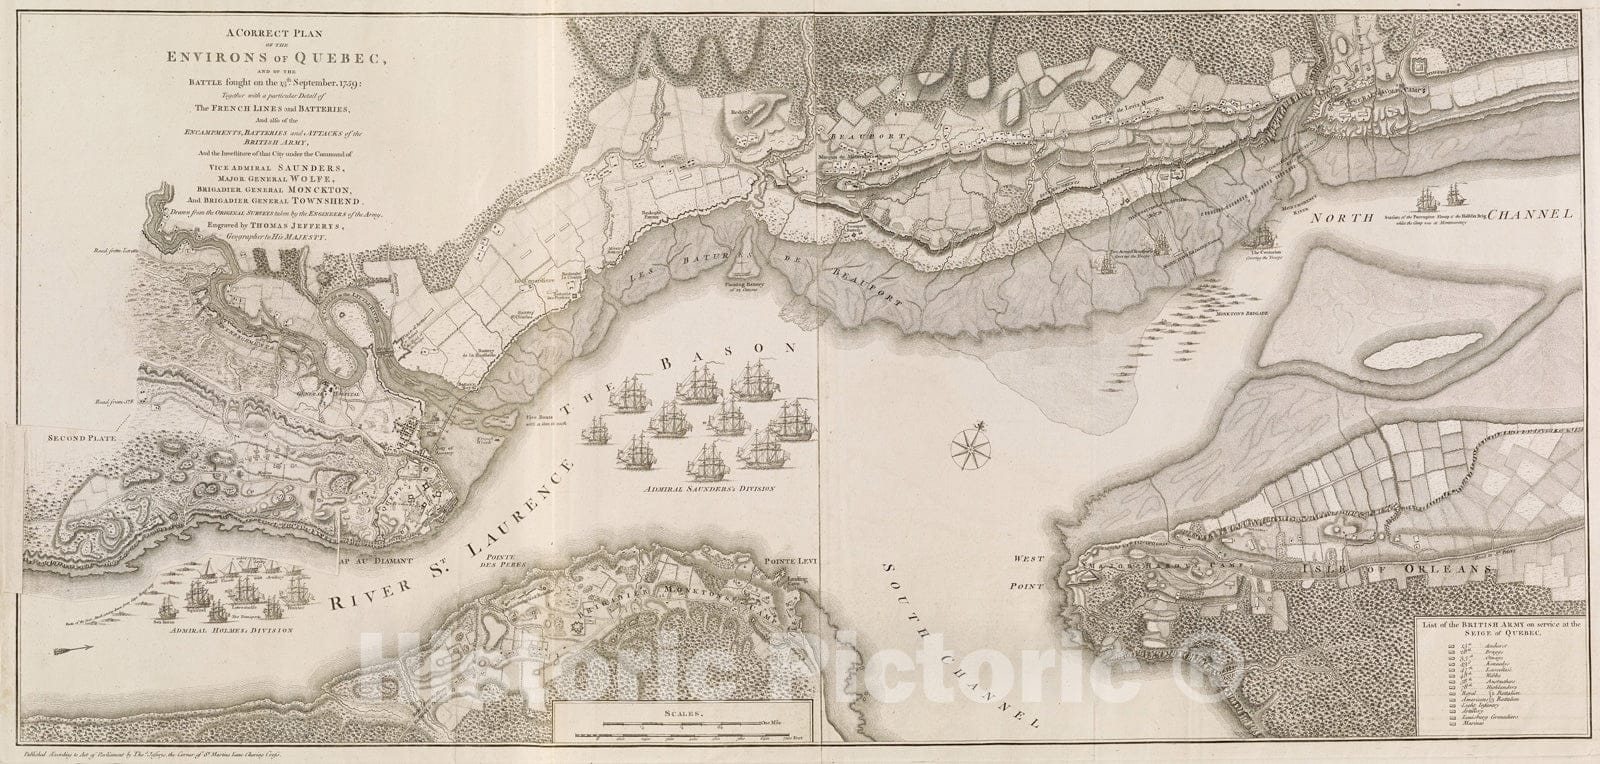 Historical Map, A correct Plan of the environs of Quebec, and of the battle fought on the 13th September, 1759 : together with a particular detail of the French lines, Vintage Wall Art